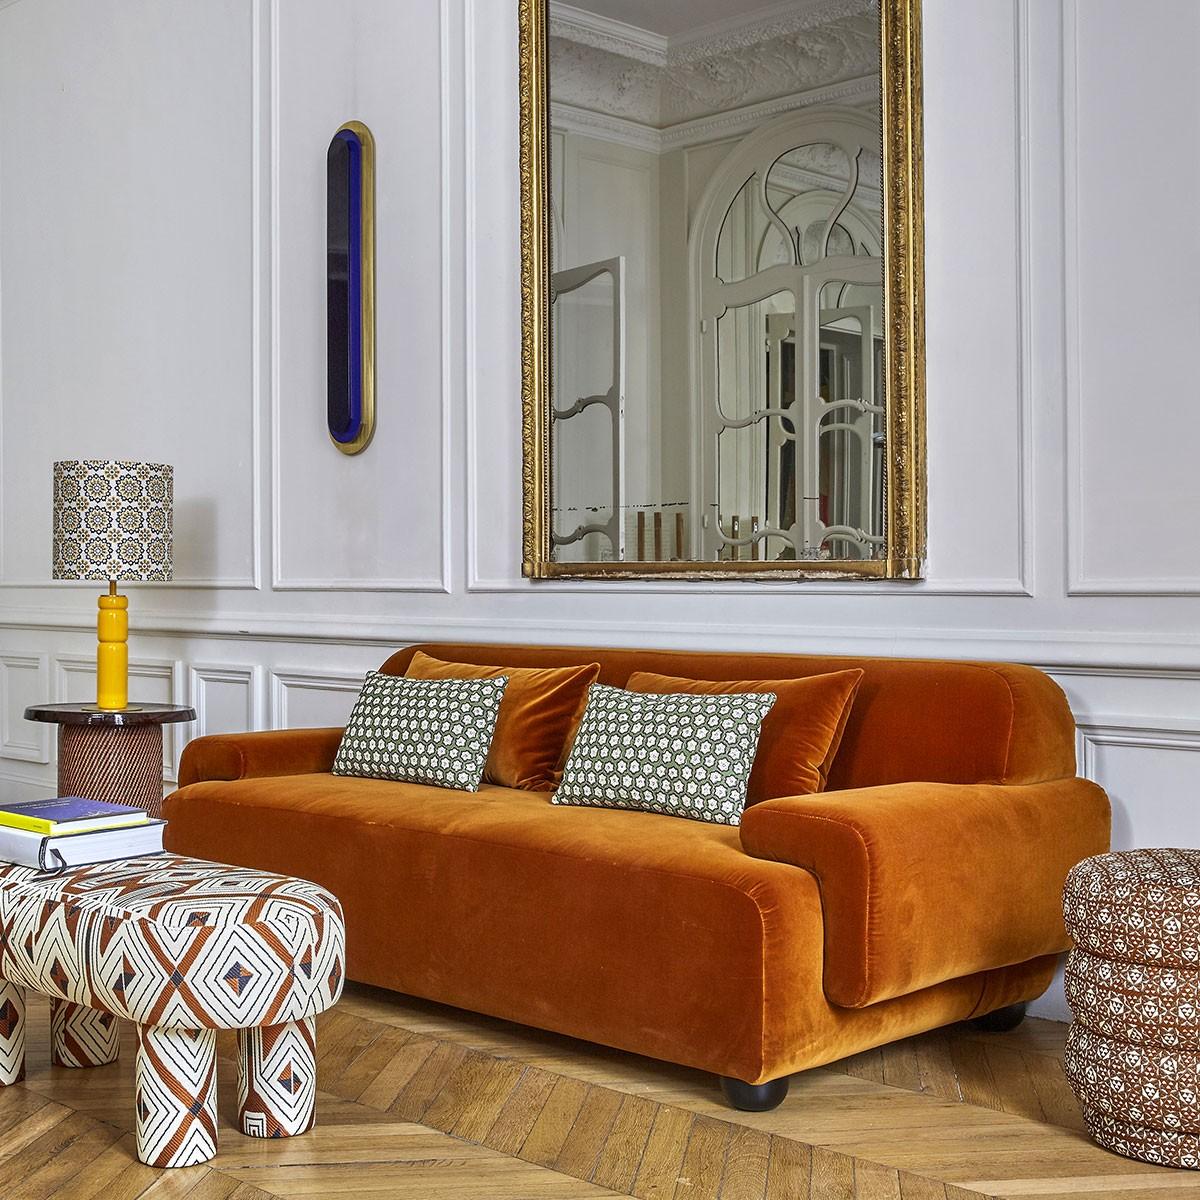 Popus Editions lena 3 seater sofa in rust megeve fabric with a knit effect

It looks like it's straight out of a movie, with its generous curves and wide armrests. It is a real invitation to spend long Sundays with the family, comfortably seated